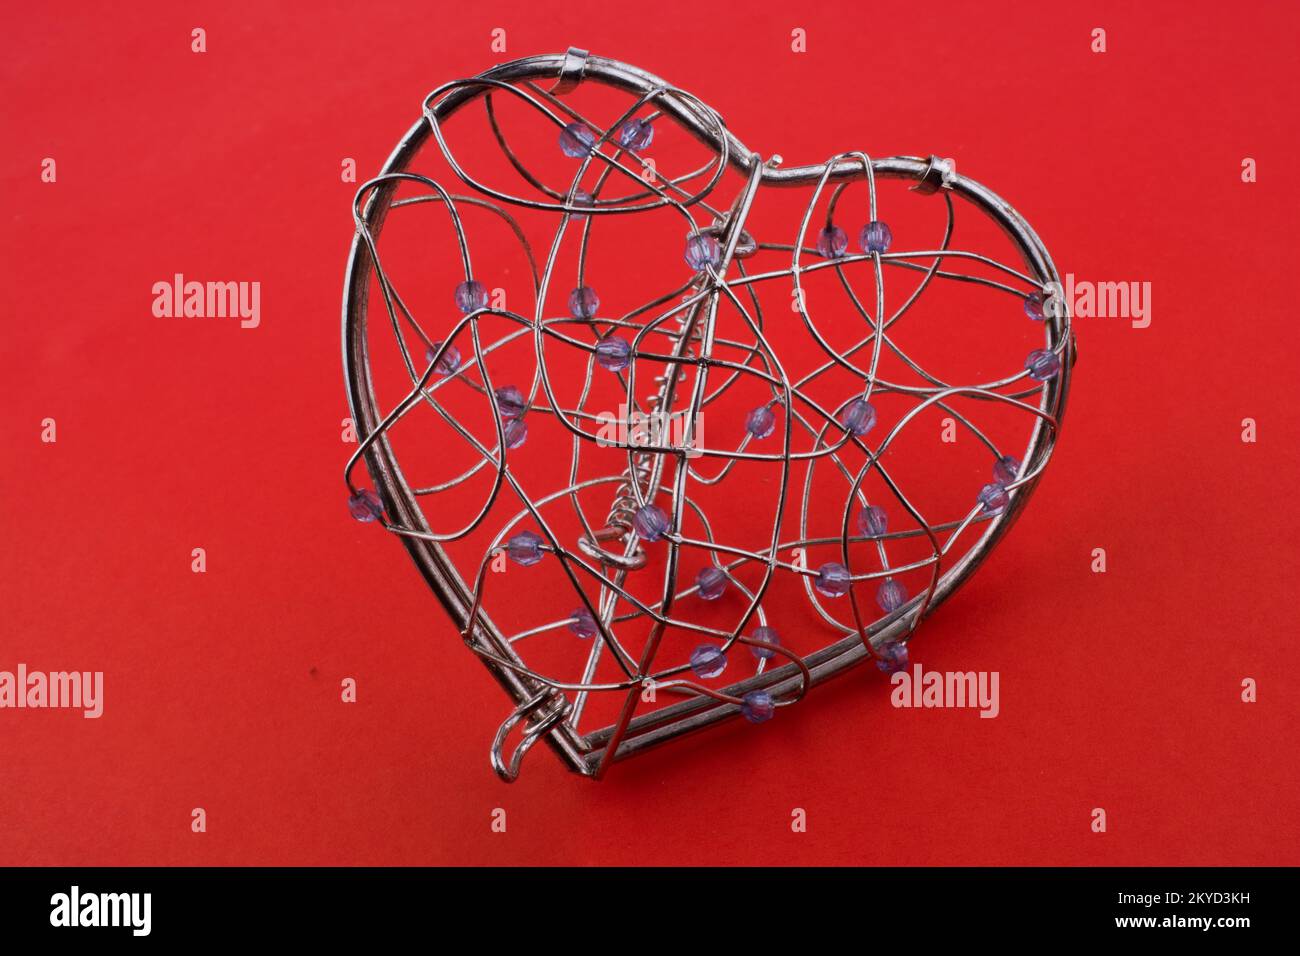 Heart cage on a red background Stock Photo